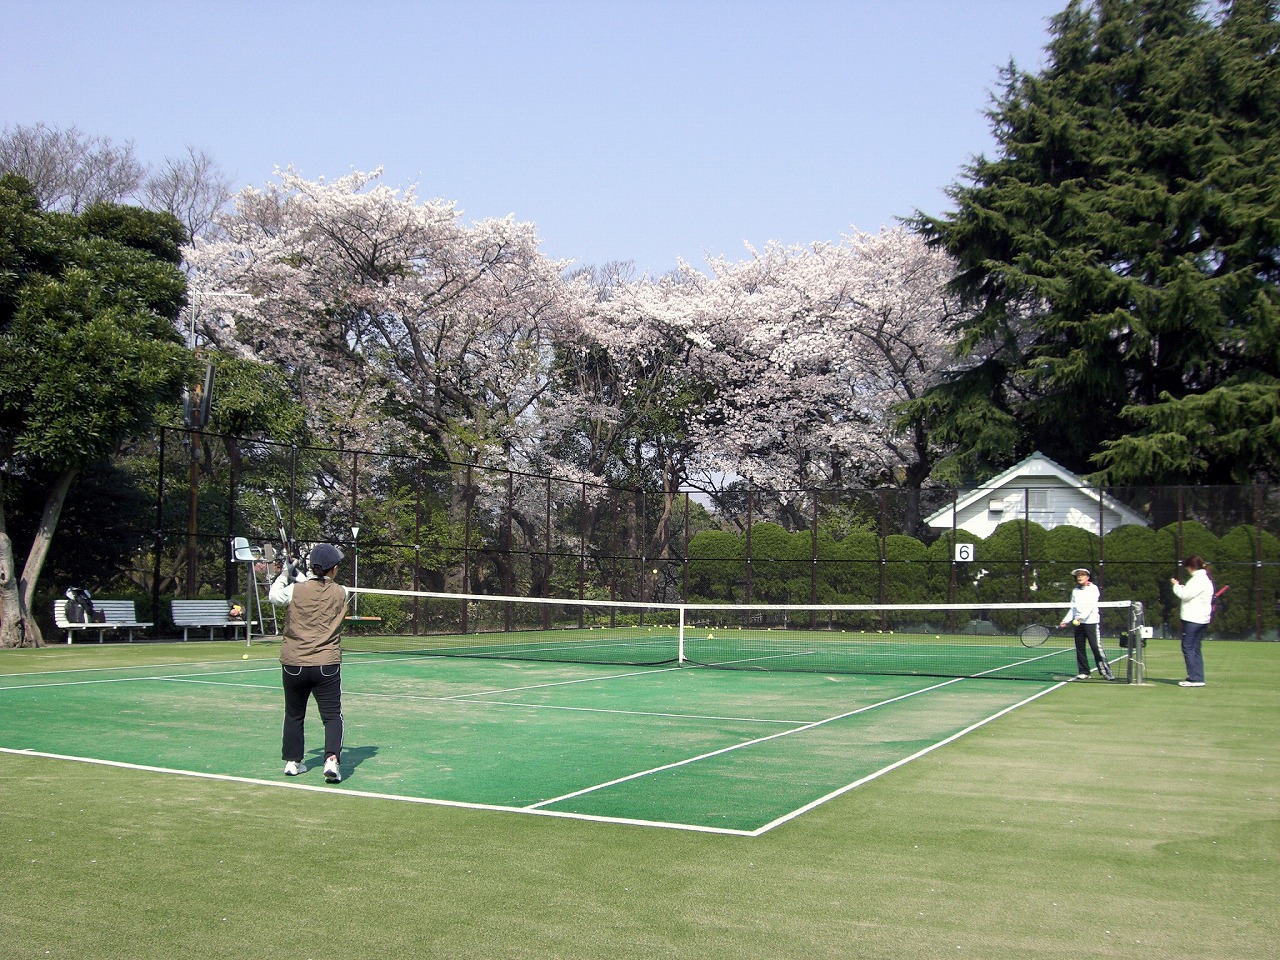 Cherry blossom @ Tennis court in Yamate park